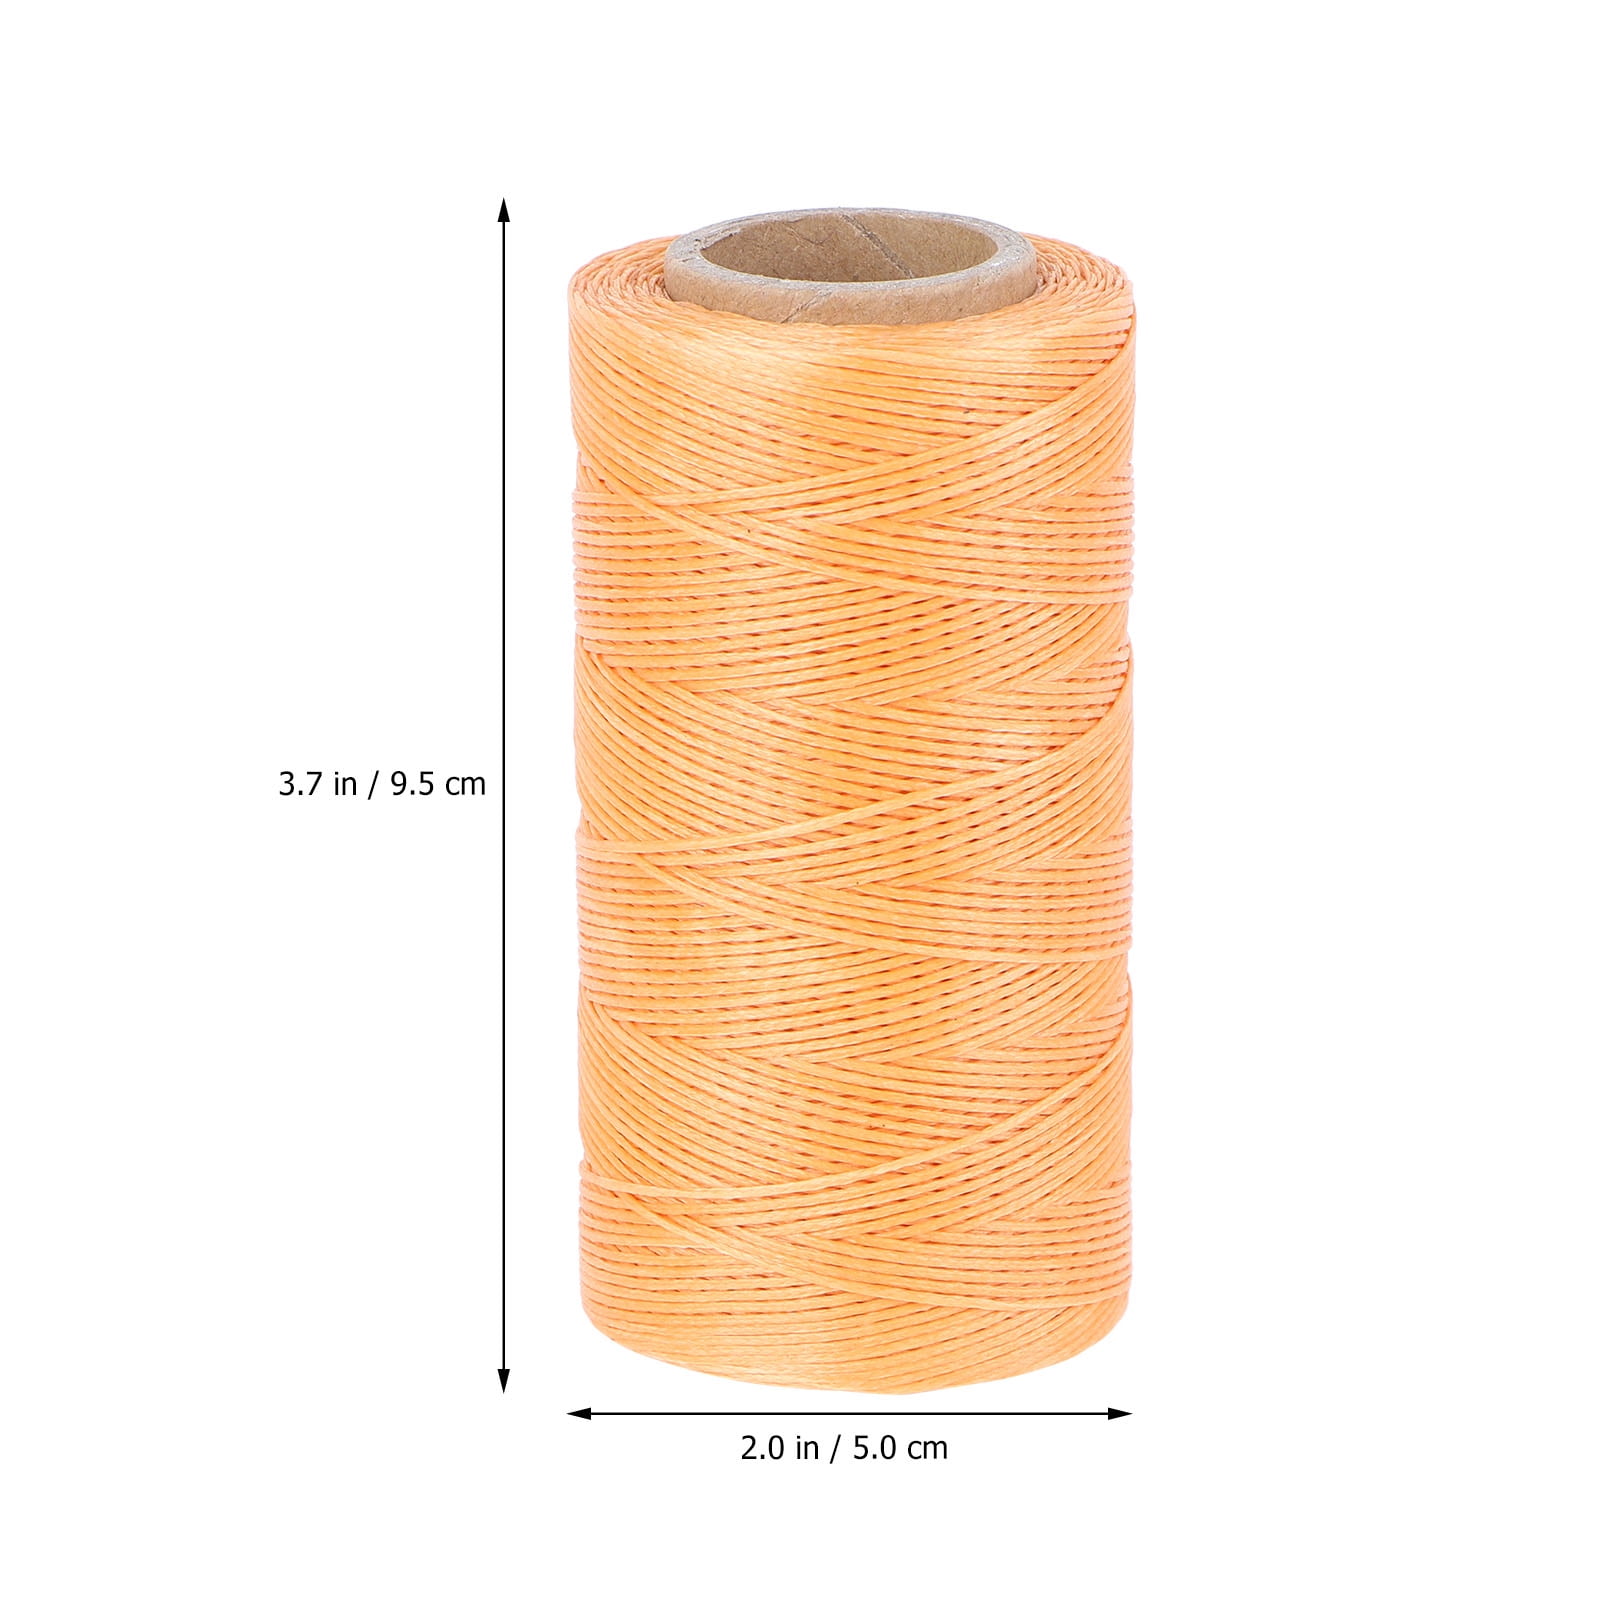 Flat Waxed Thread (Gray) - 284Yard 1mm 150D Wax String Cord Sewing Craft  Tool Portable for DIY Handicraft Leather Products Beading Hand Stitching